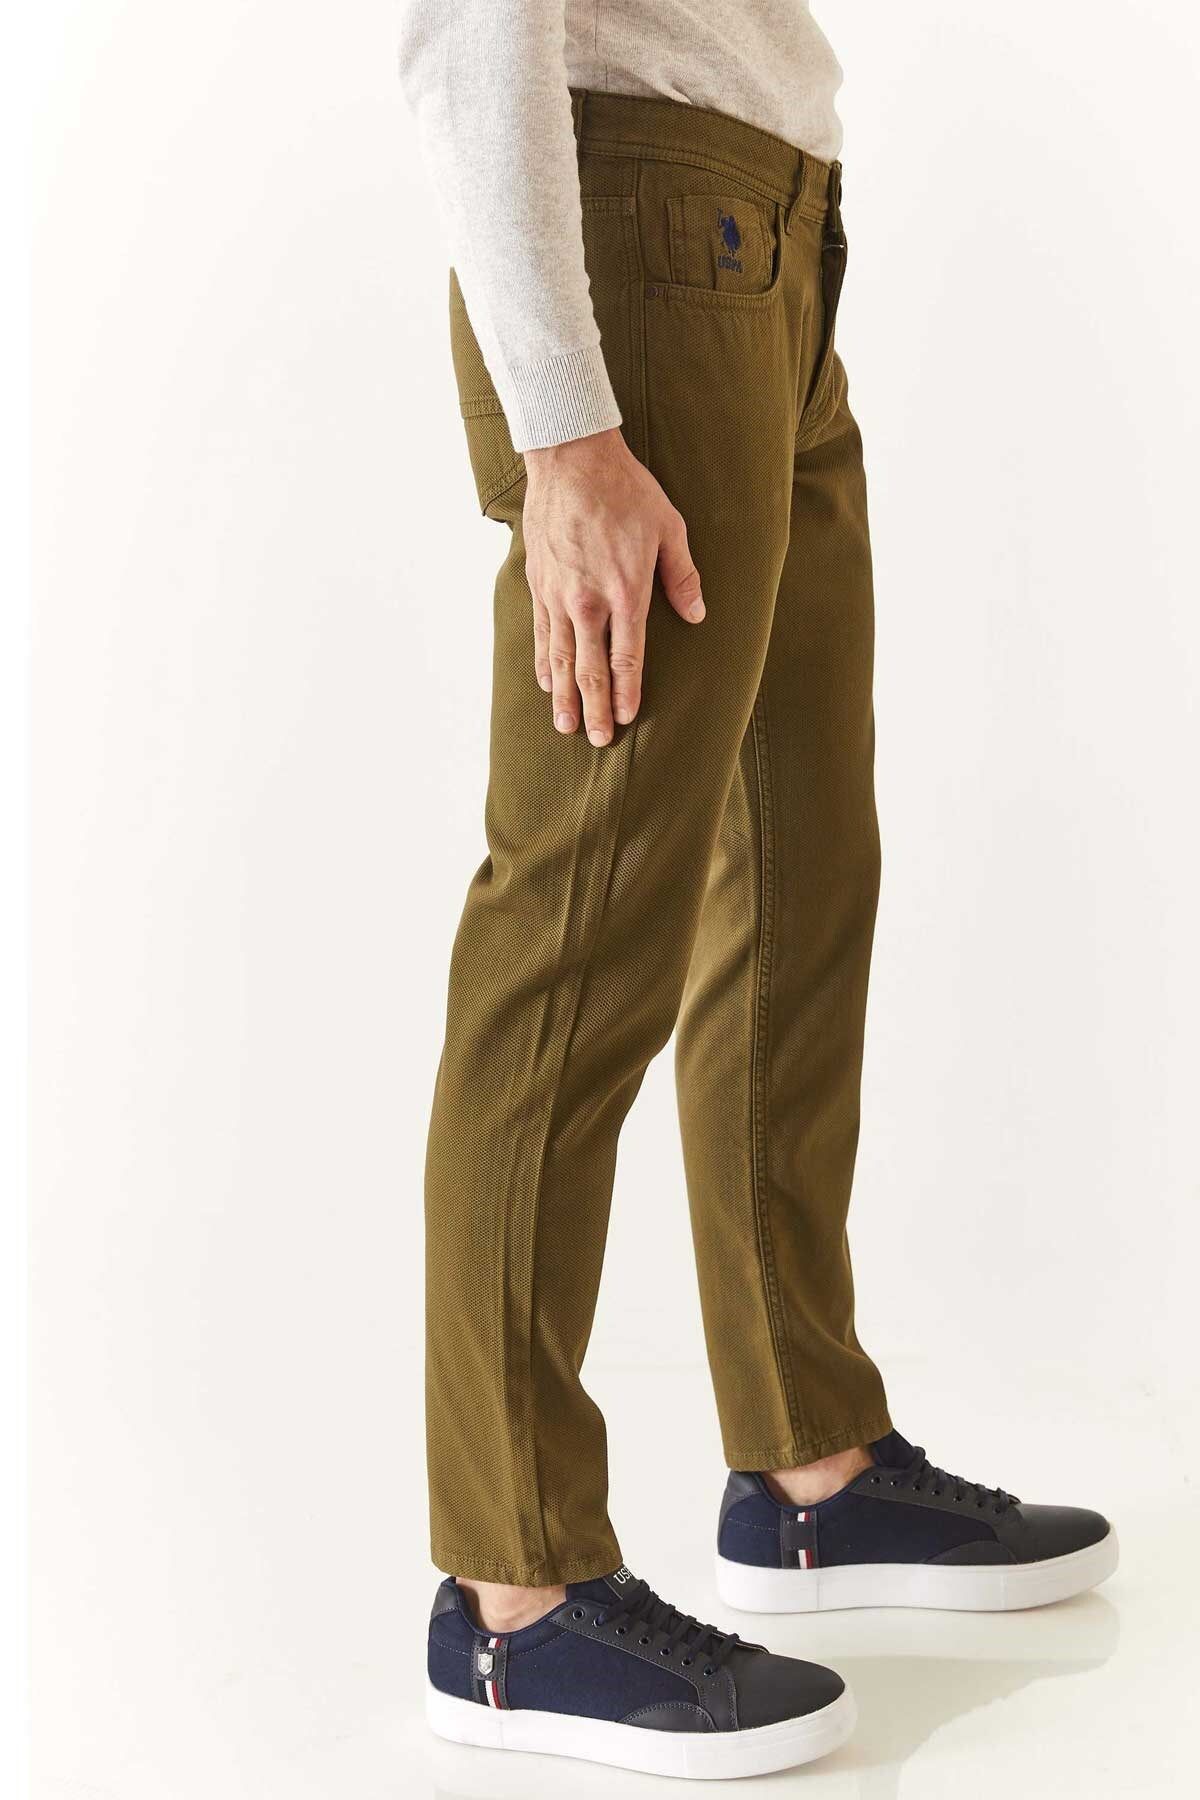 Buy U.S. POLO ASSN. Natural Solid Cotton Slim Fit Men's Trousers | Shoppers  Stop